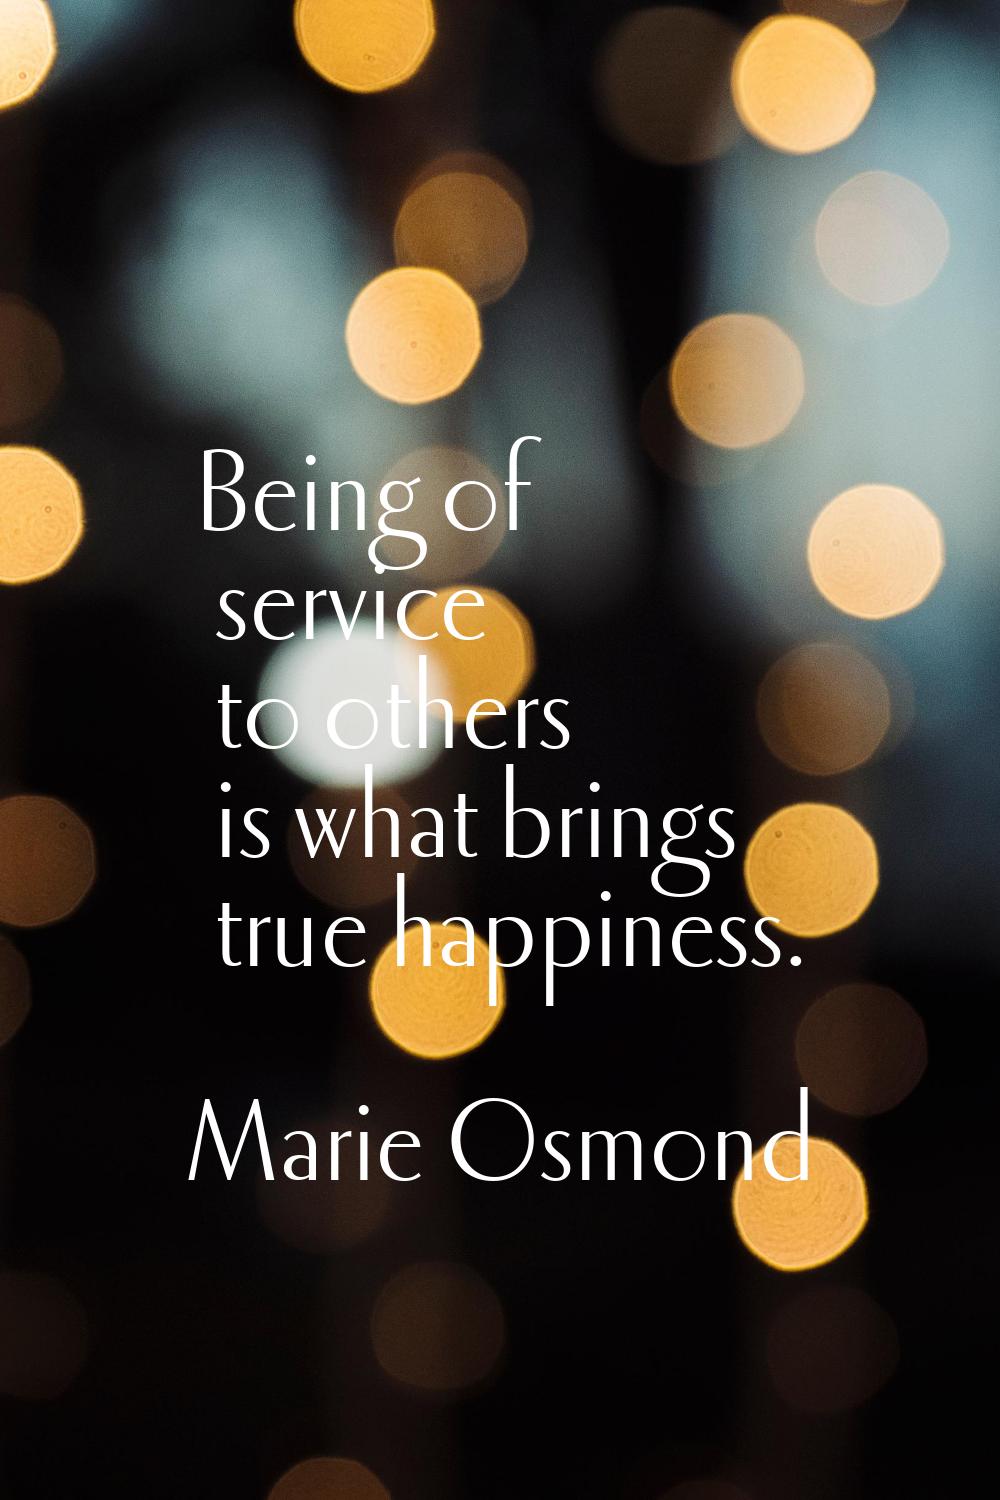 Being of service to others is what brings true happiness.